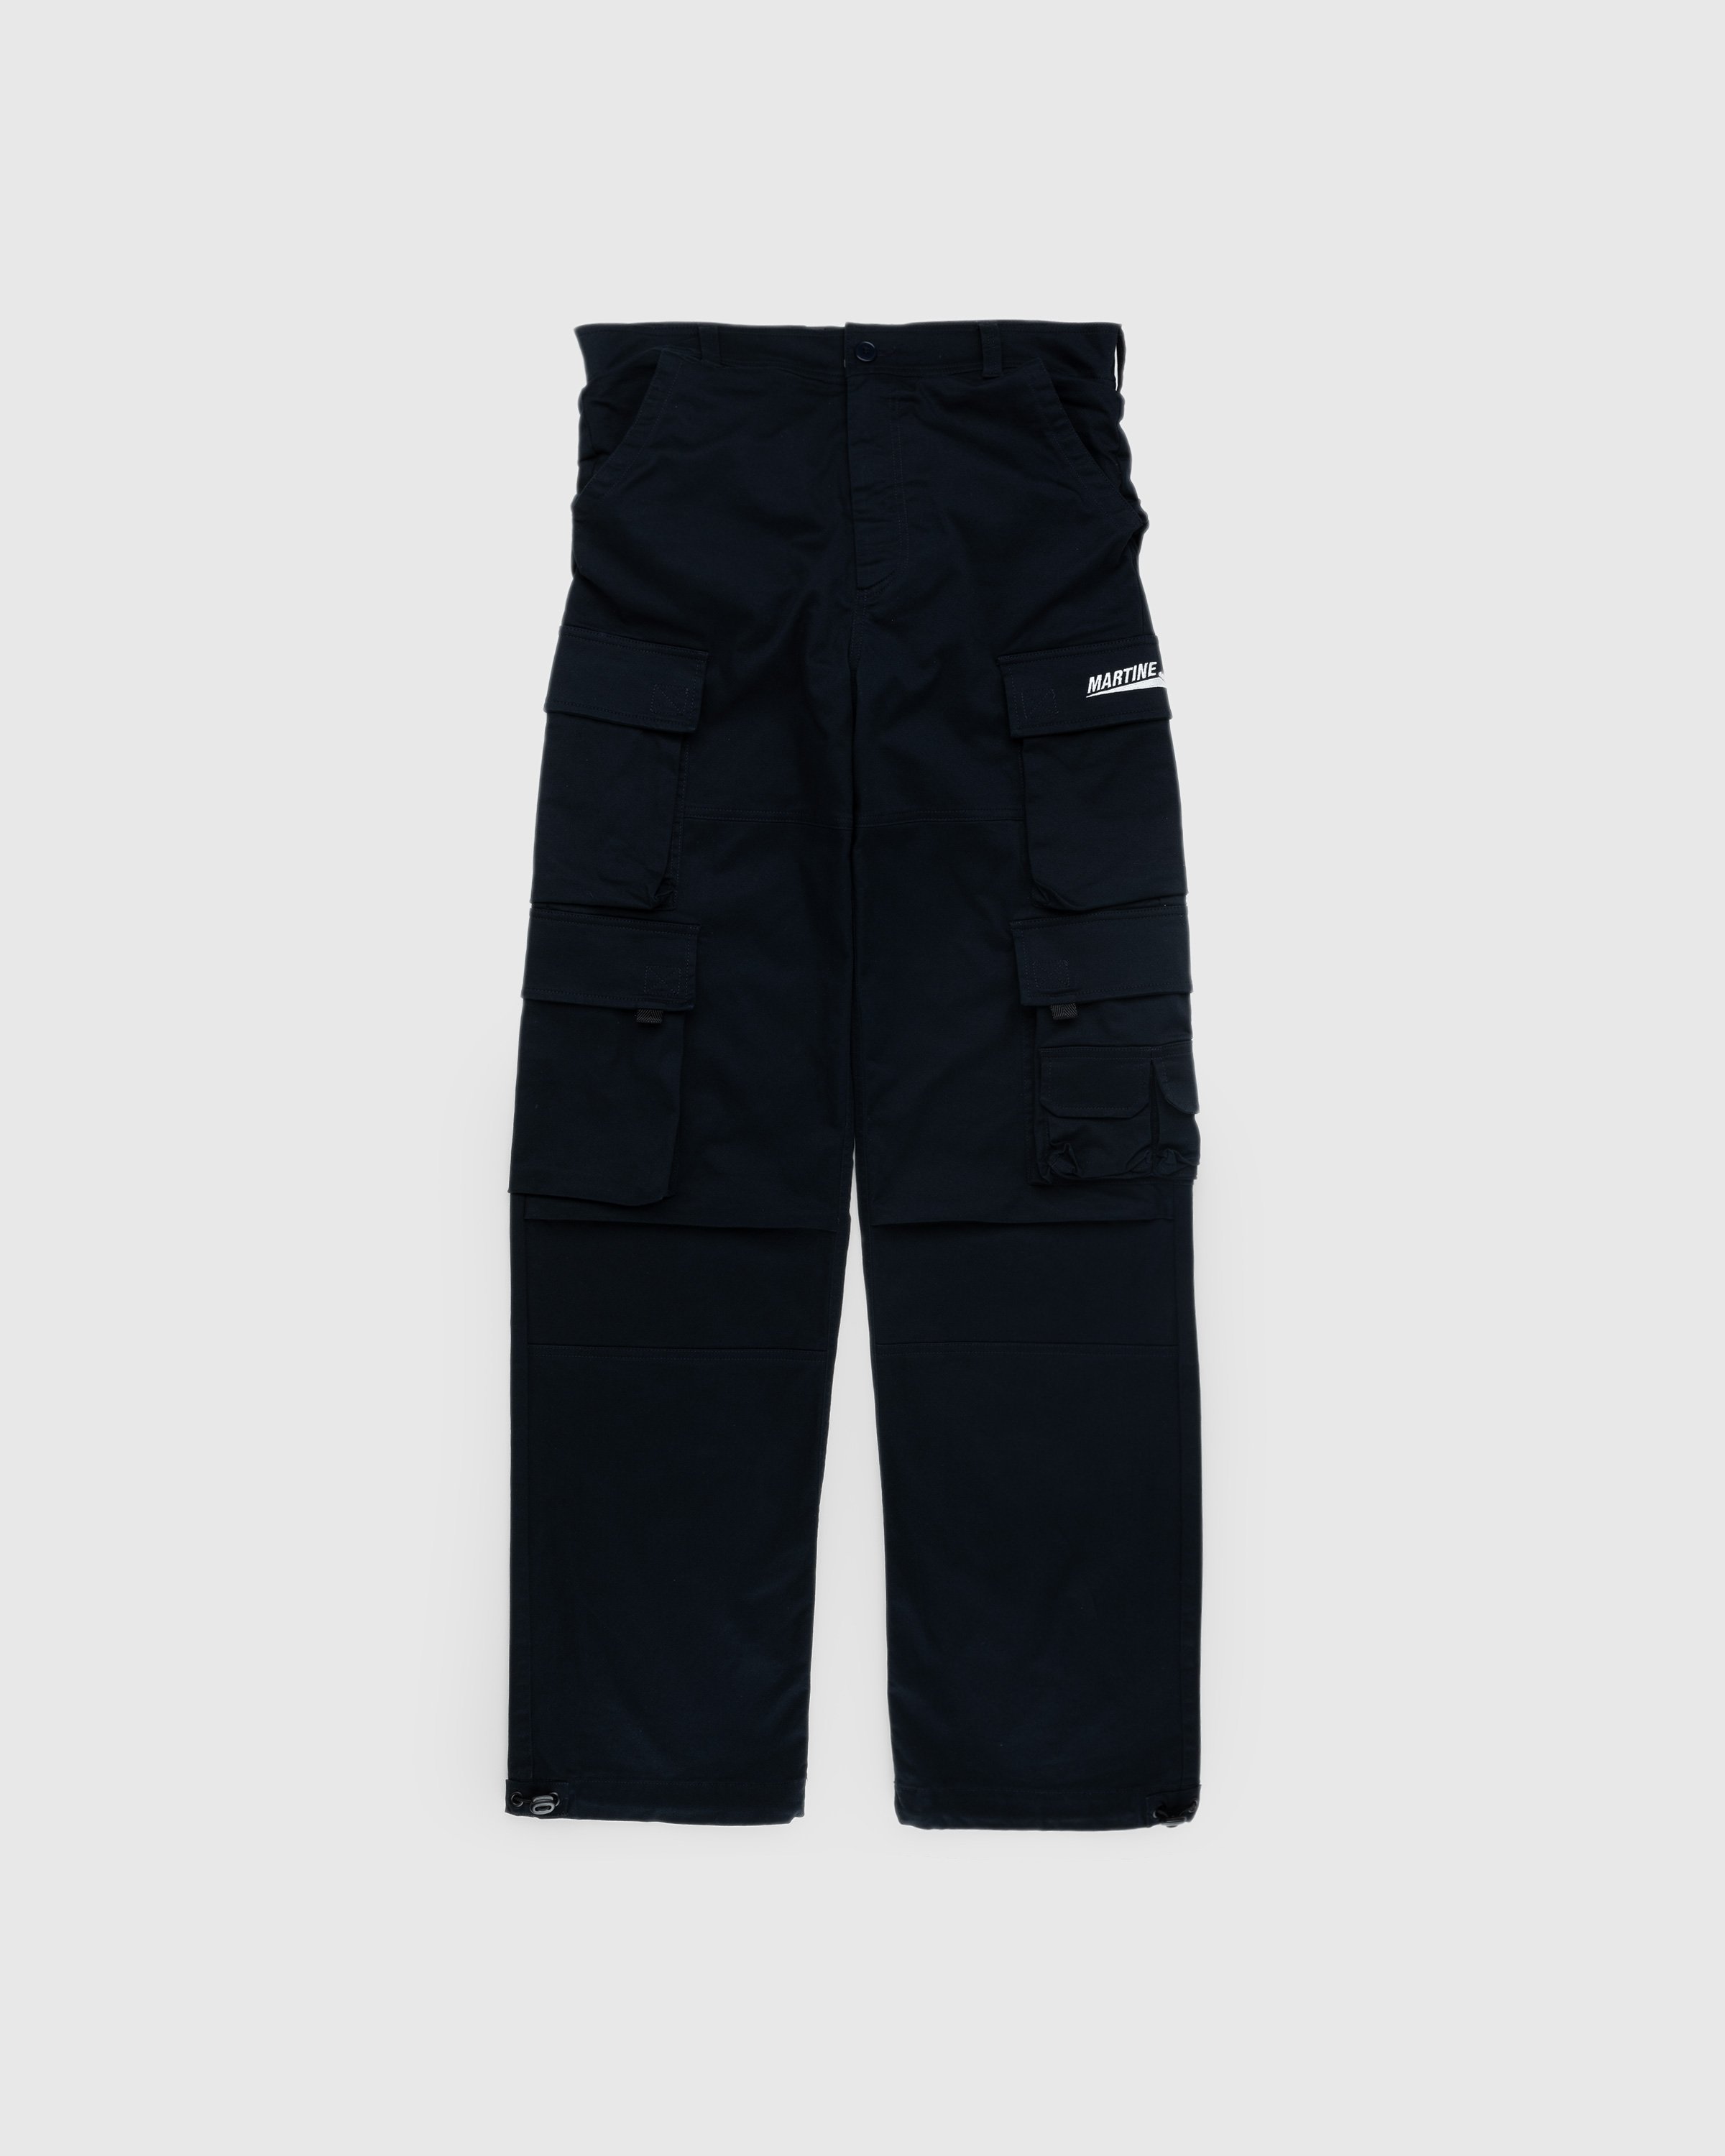 Martine Rose - Pulled Cargo Trouser Navy - Clothing - Blue - Image 1